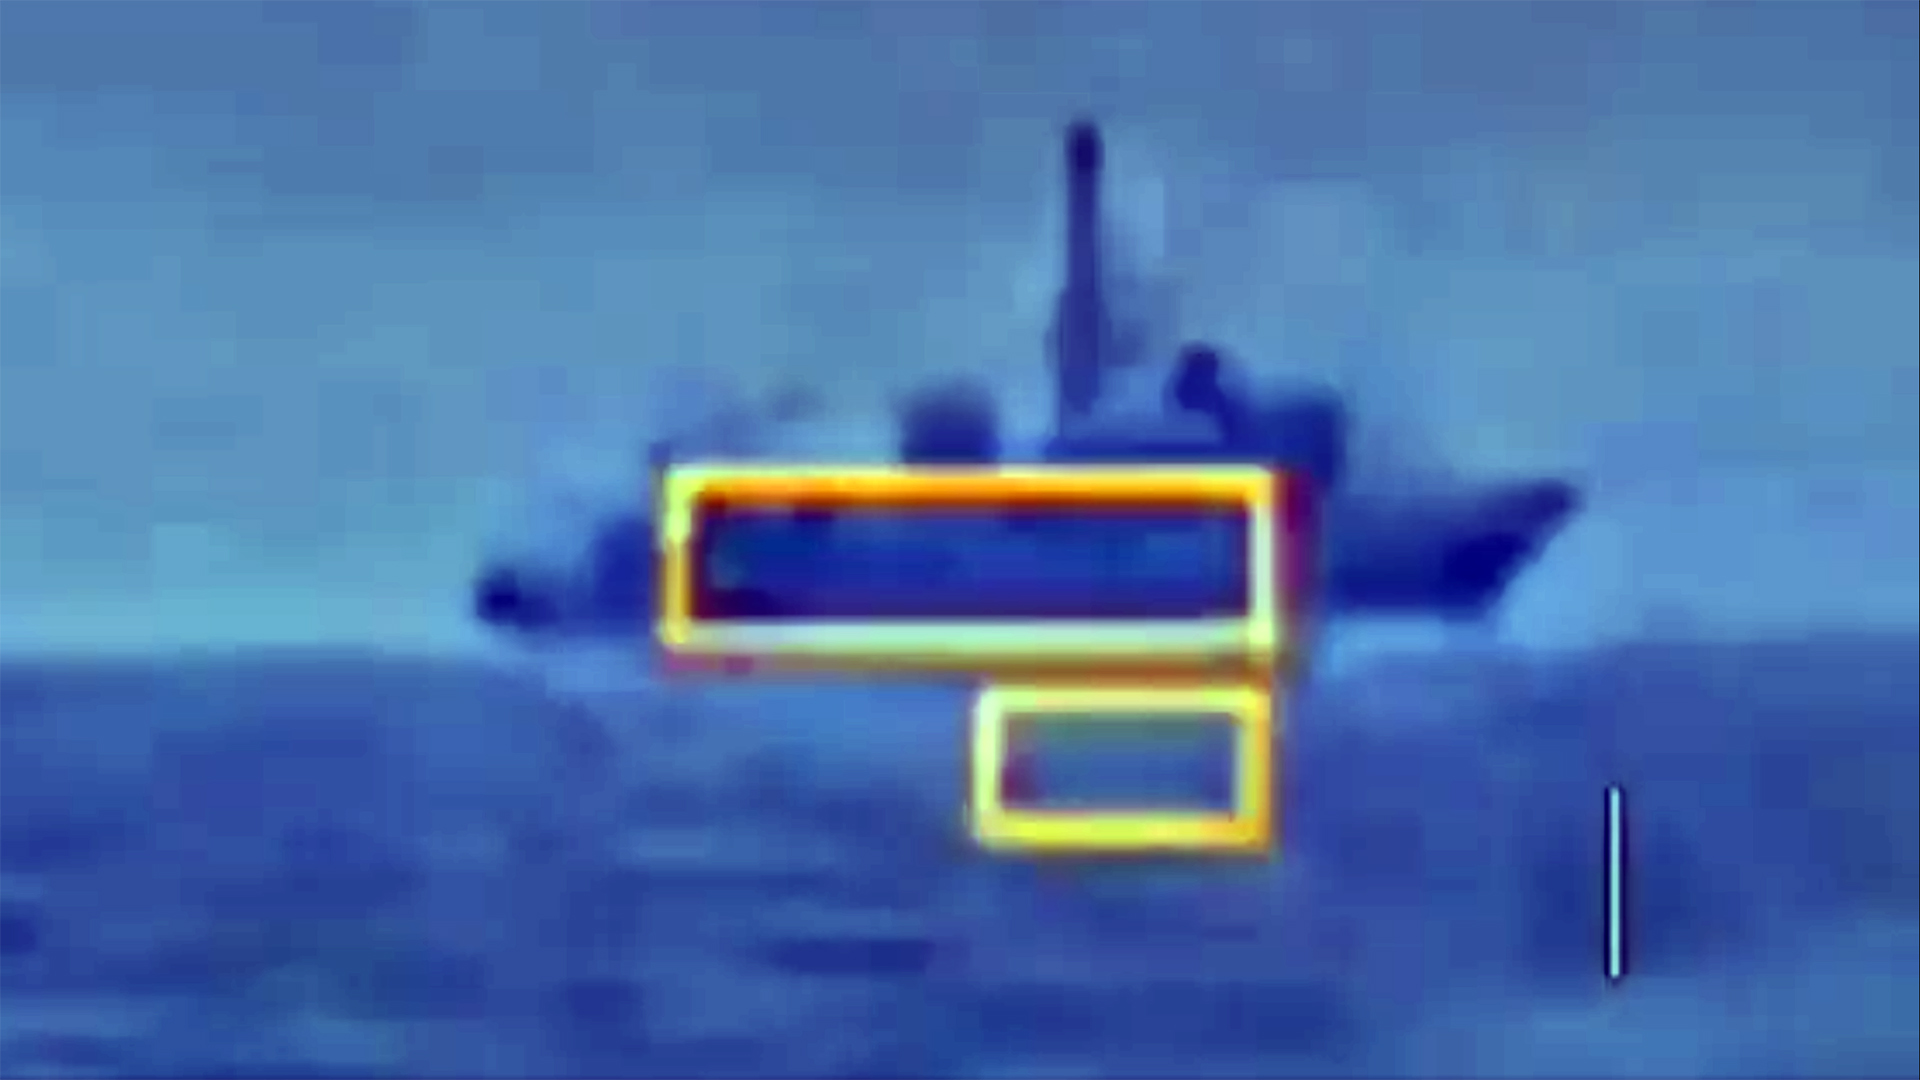 What really happened to the Russian Navy's Ivan Khurs intelligence ship remains a mystery.